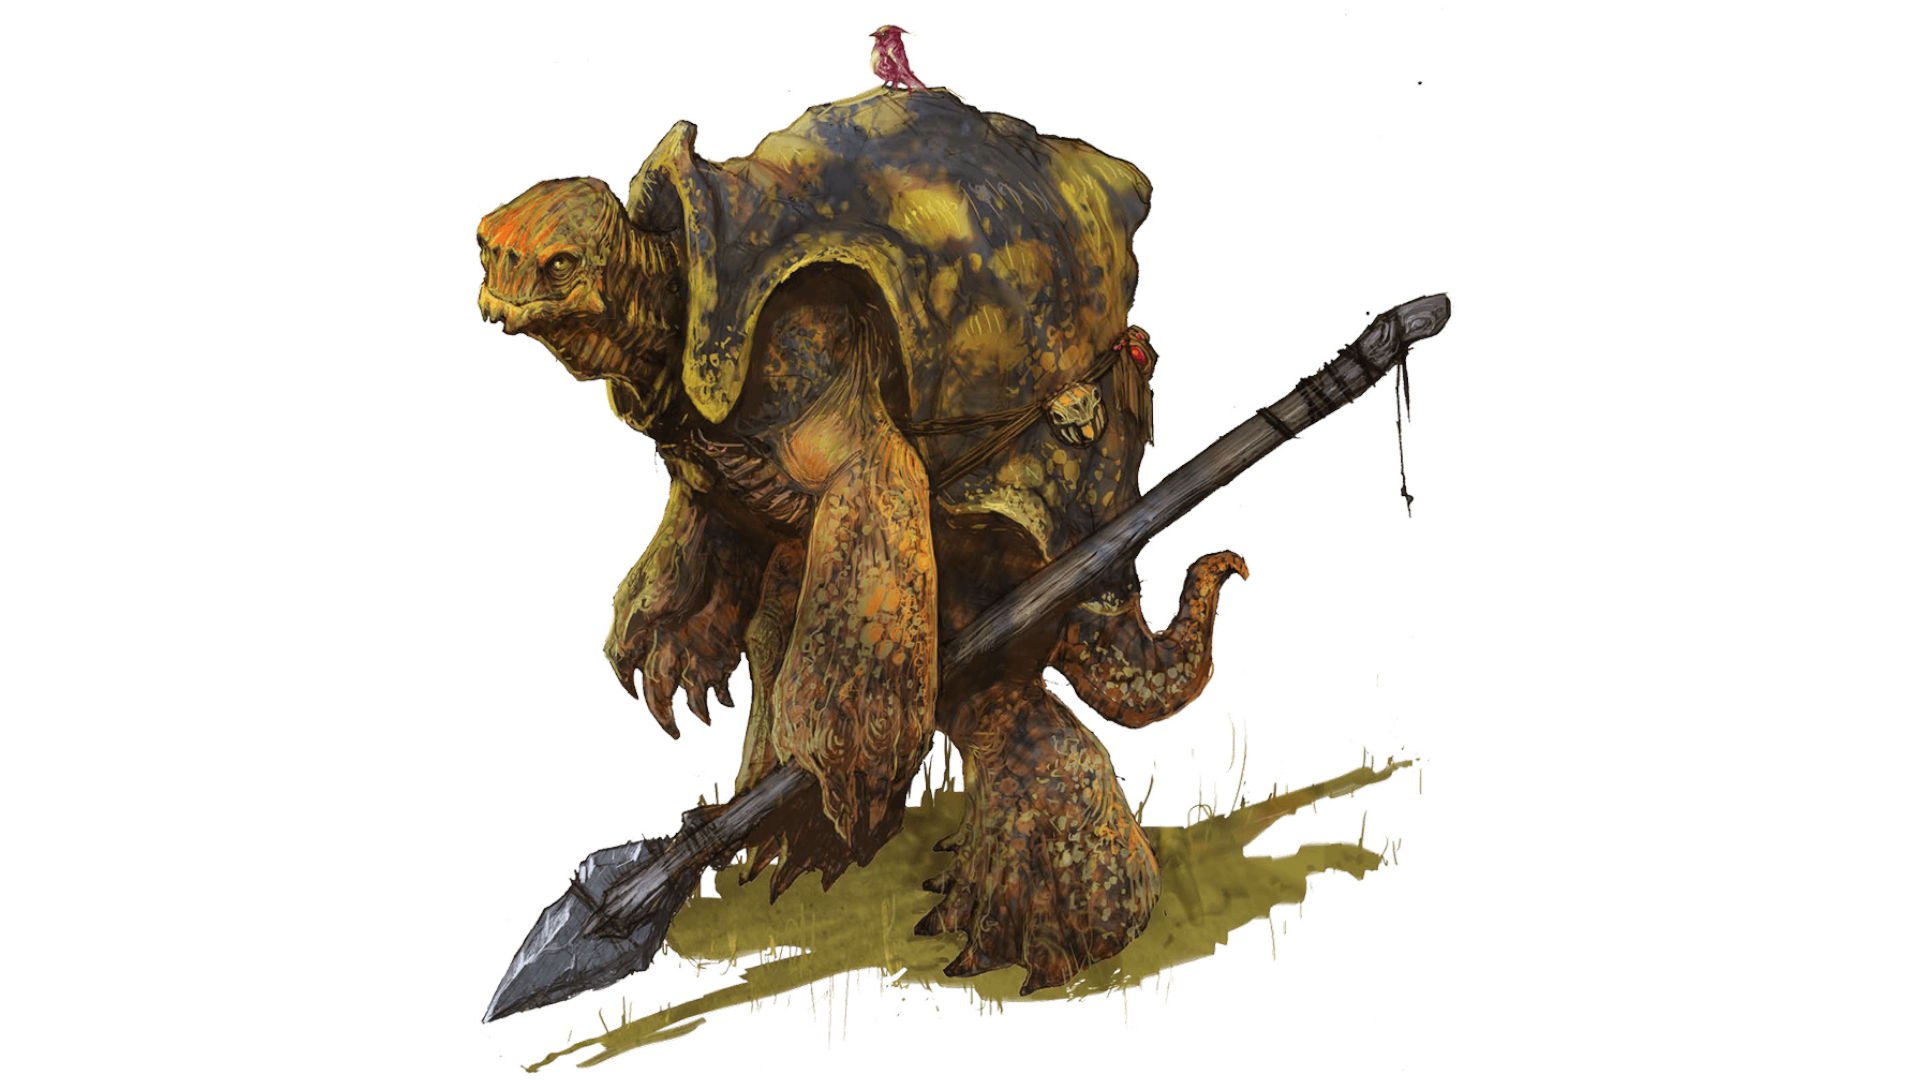 DnD Monk 5E - Wizards of the Coast art of a Tortle carrying a spear